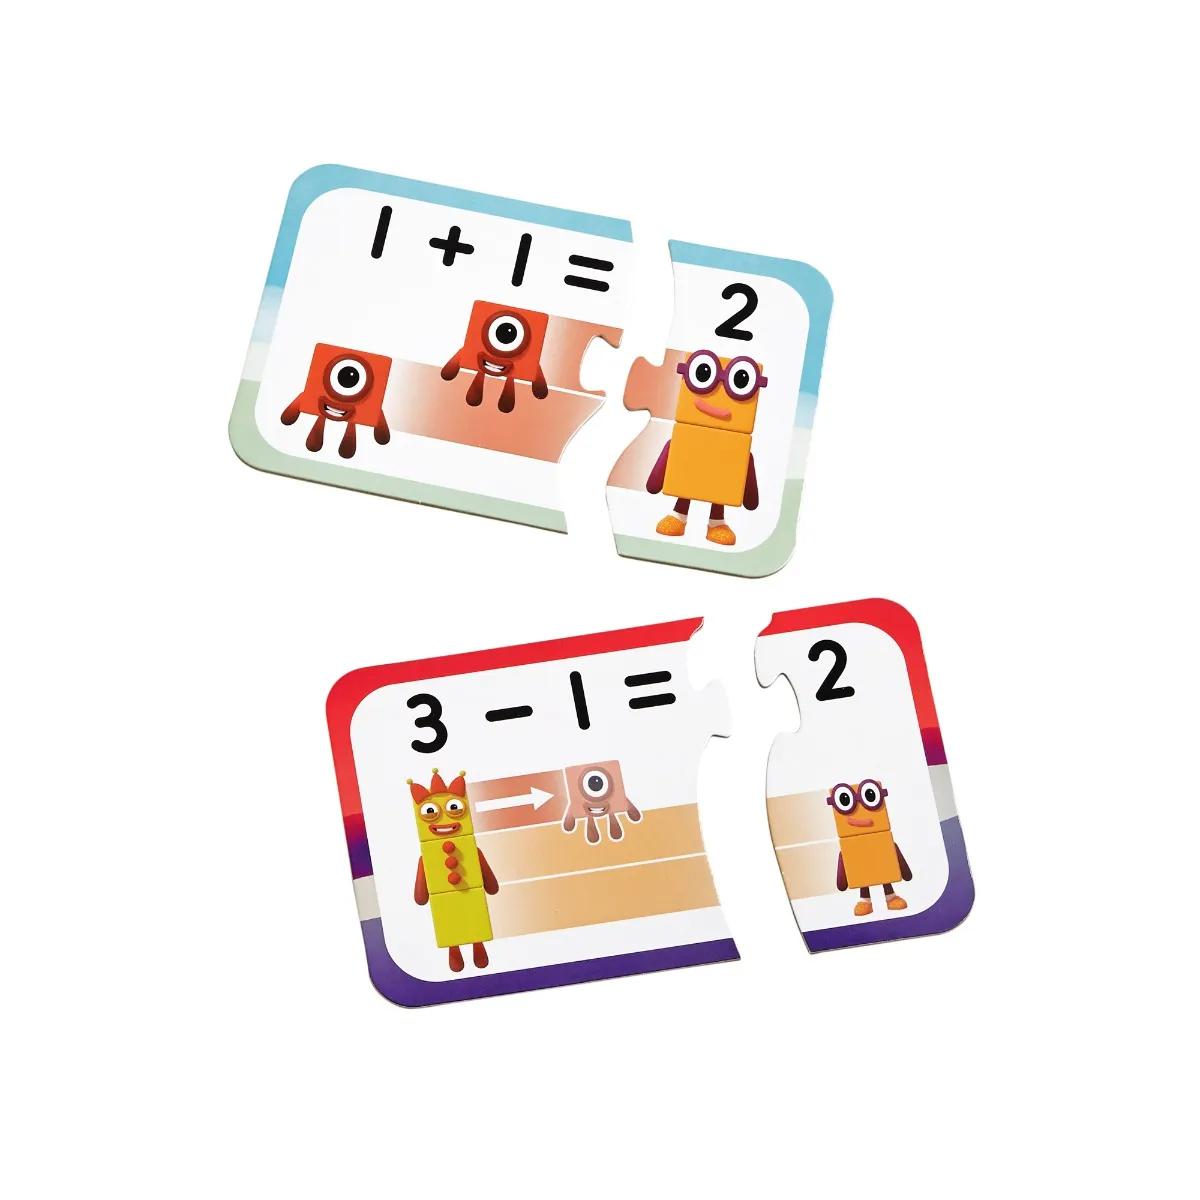 Numberblocks Adding and Subtracting Puzzle Set-Jigsaw Puzzles-Learning Resources-Yes Bebe